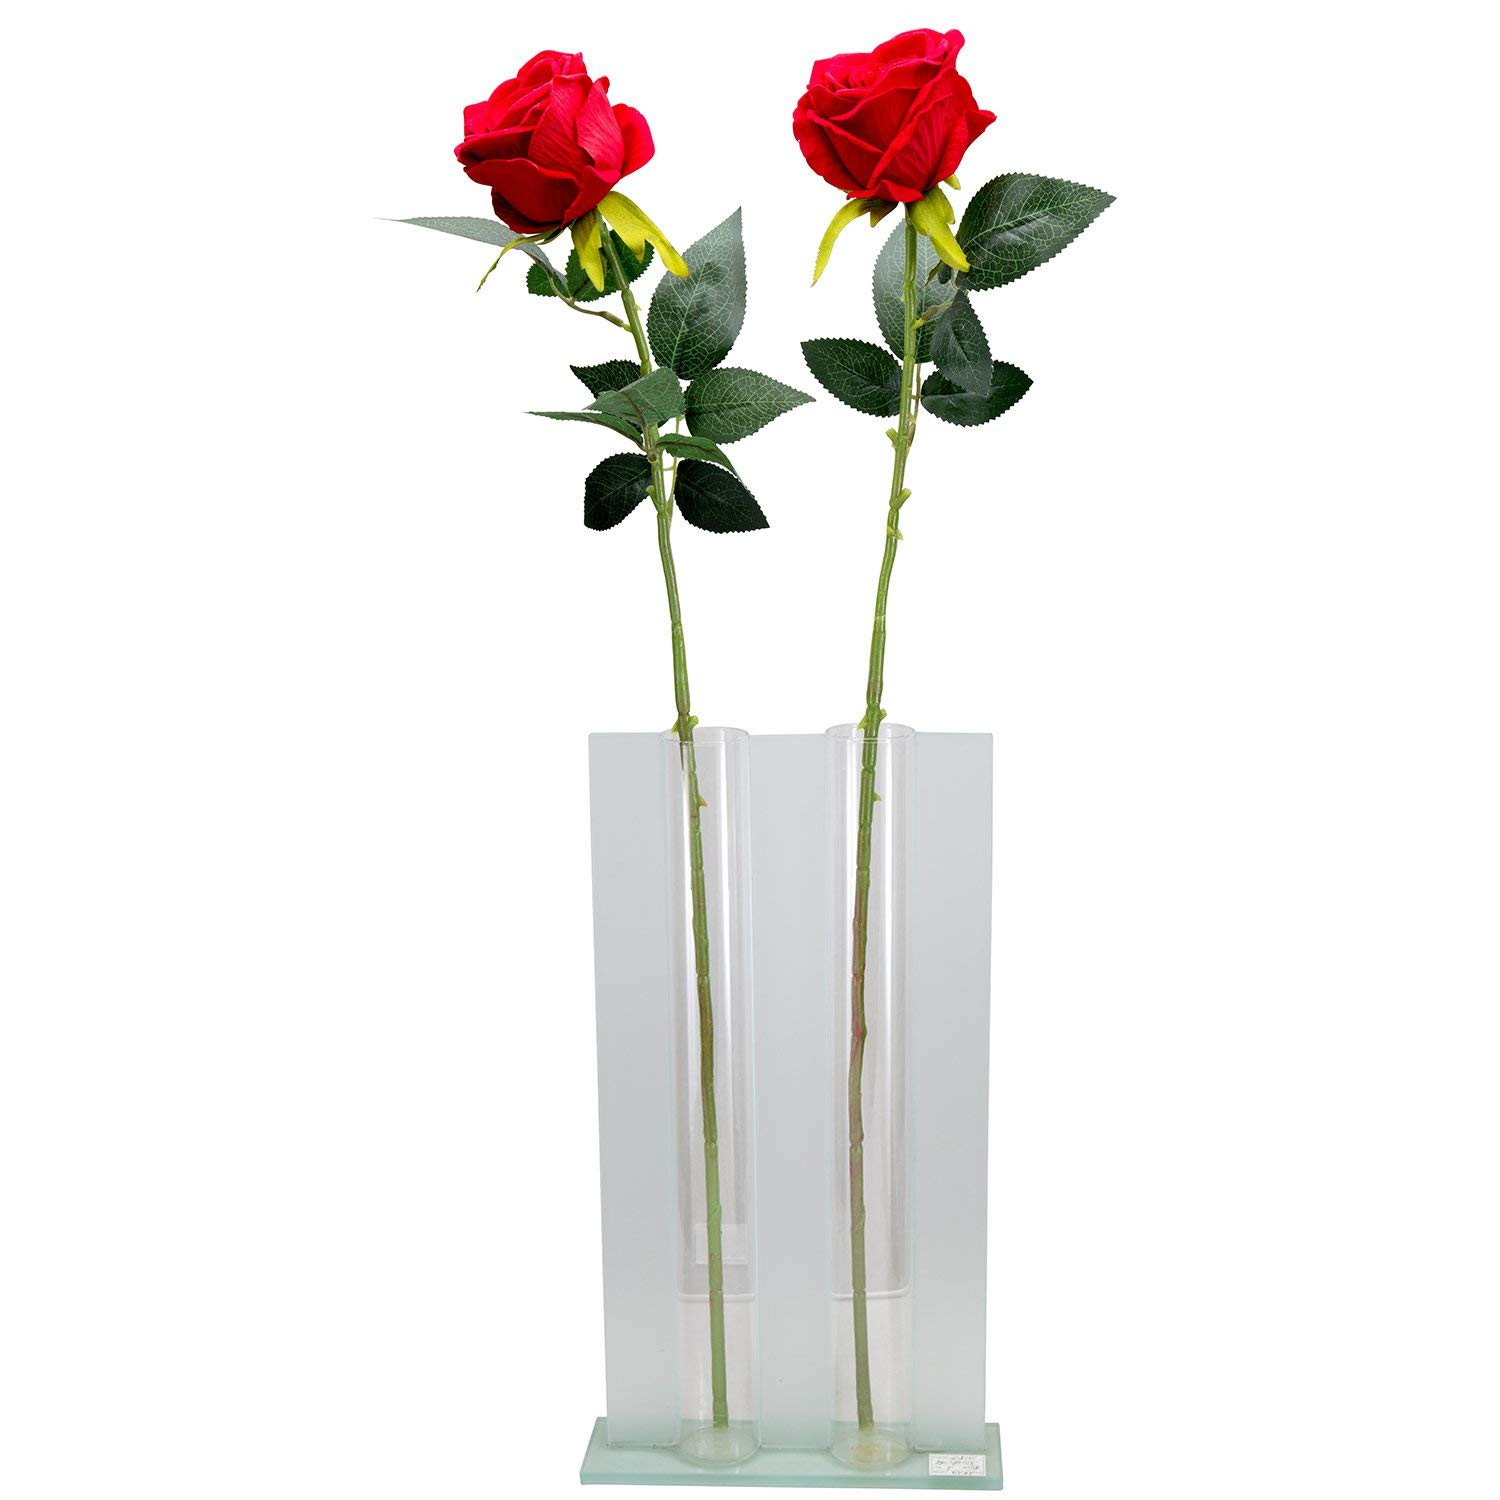 fake flower vase fillers of amazon com artificial silk roses red velvet 30 long stemmed 1 intended for amazon com artificial silk roses red velvet 30 long stemmed 1 dozen fake flowers for bouquets weddings valentines by royal imports home kitchen